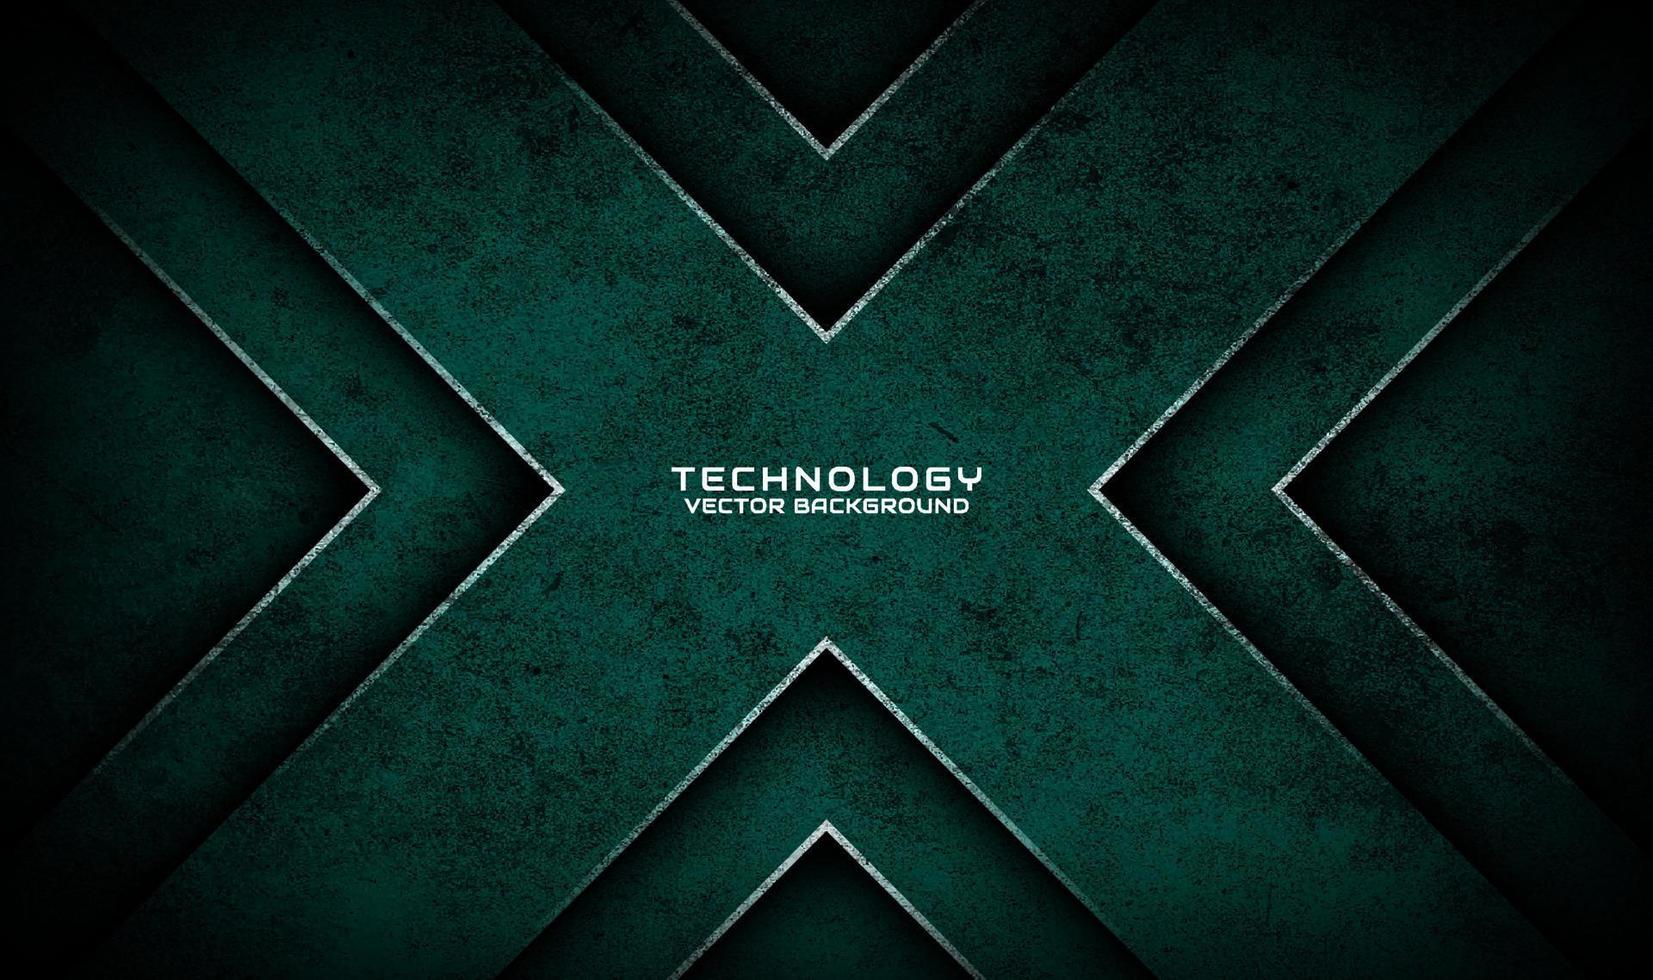 3D green technology abstract background overlap layer on dark space with white x shape effect decoration. Graphic design element dirty style concept for banner, flyer, card, brochure, or landing page vector